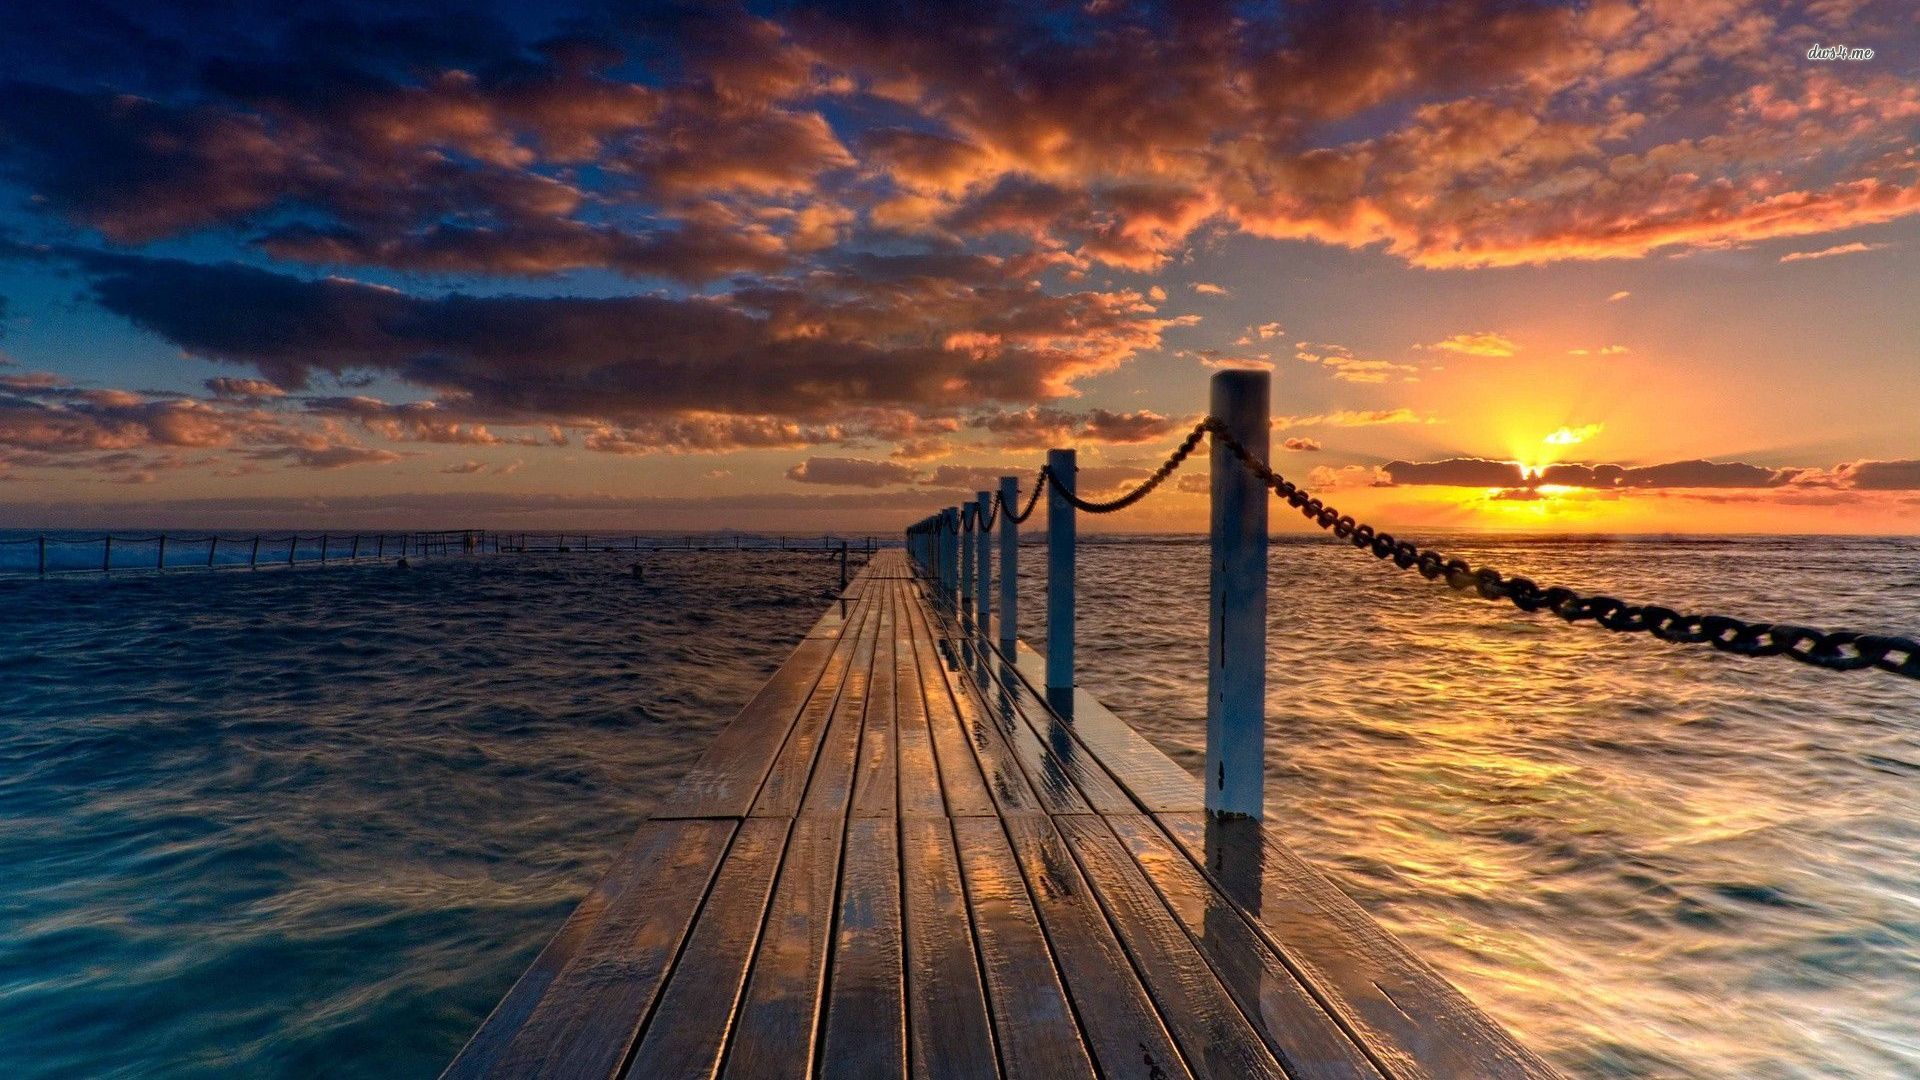 294491 Water, Body of Water, Pier, Lake, Dock, Apple iPhone 11 background,  828x1792 - Rare Gallery HD Wallpapers